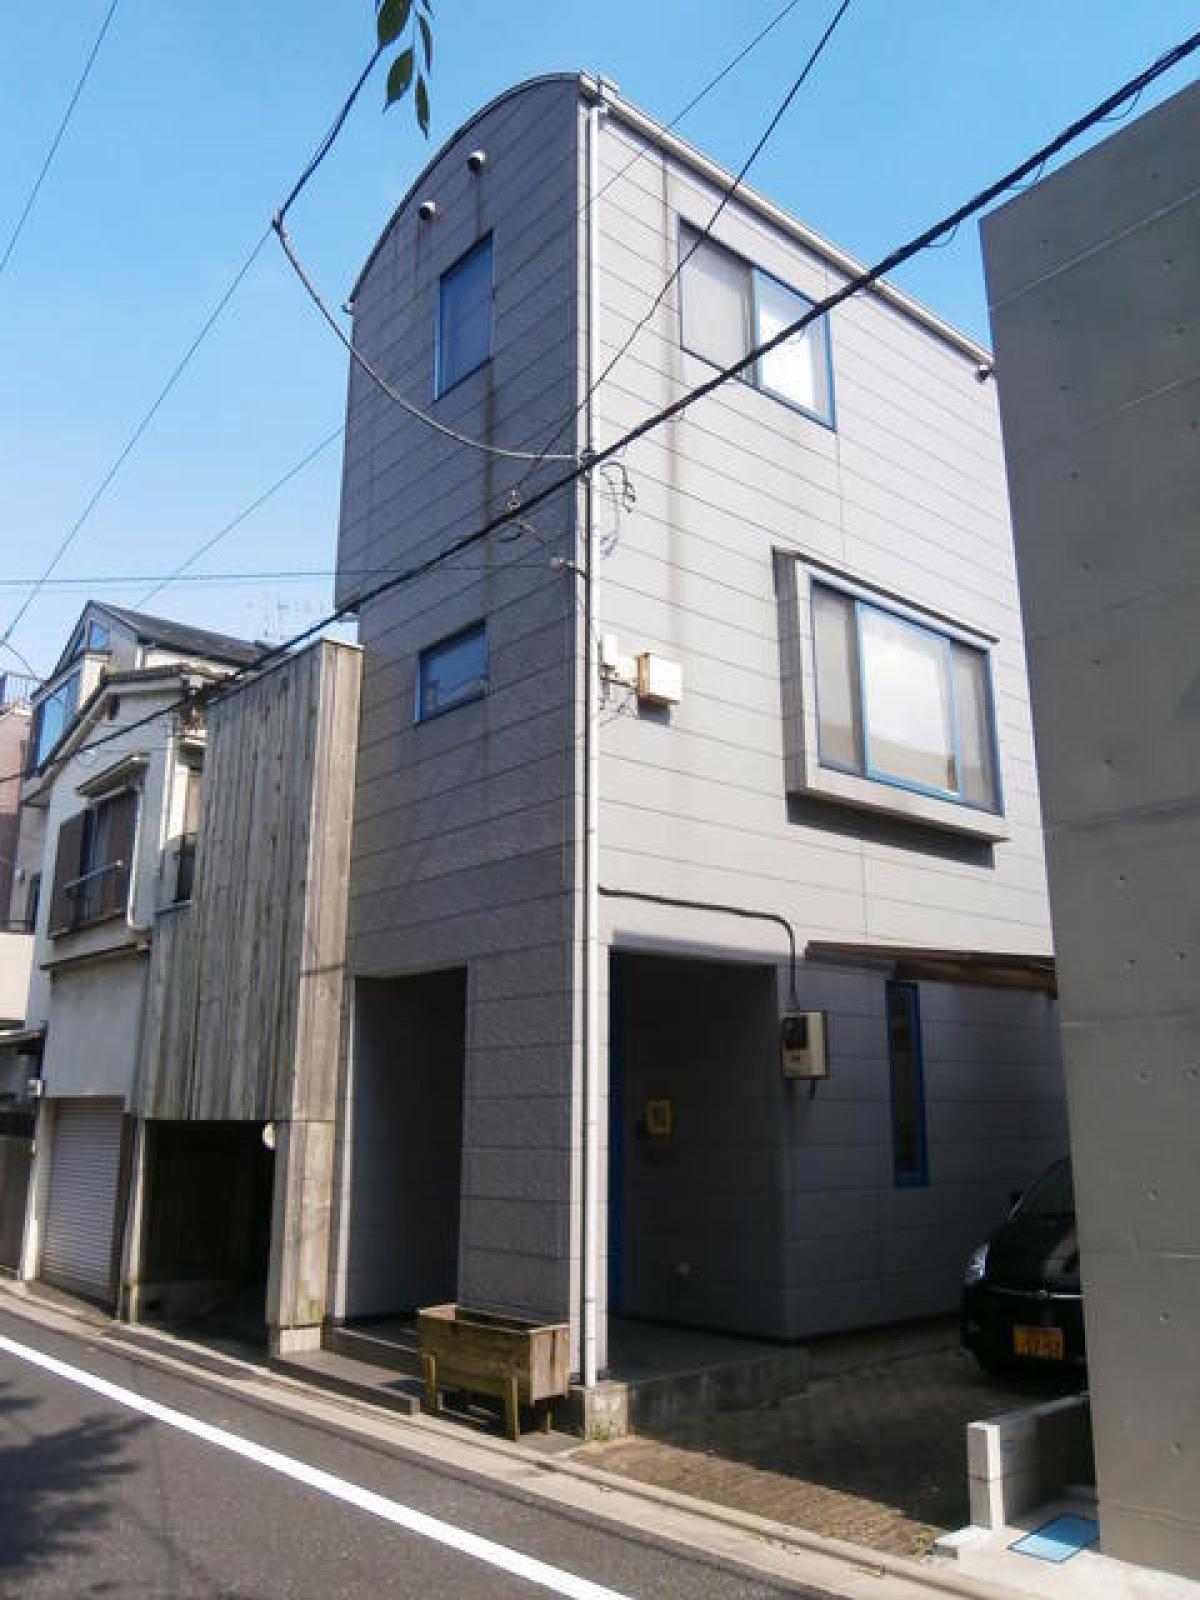 Picture of Home For Sale in Bunkyo Ku, Tokyo, Japan